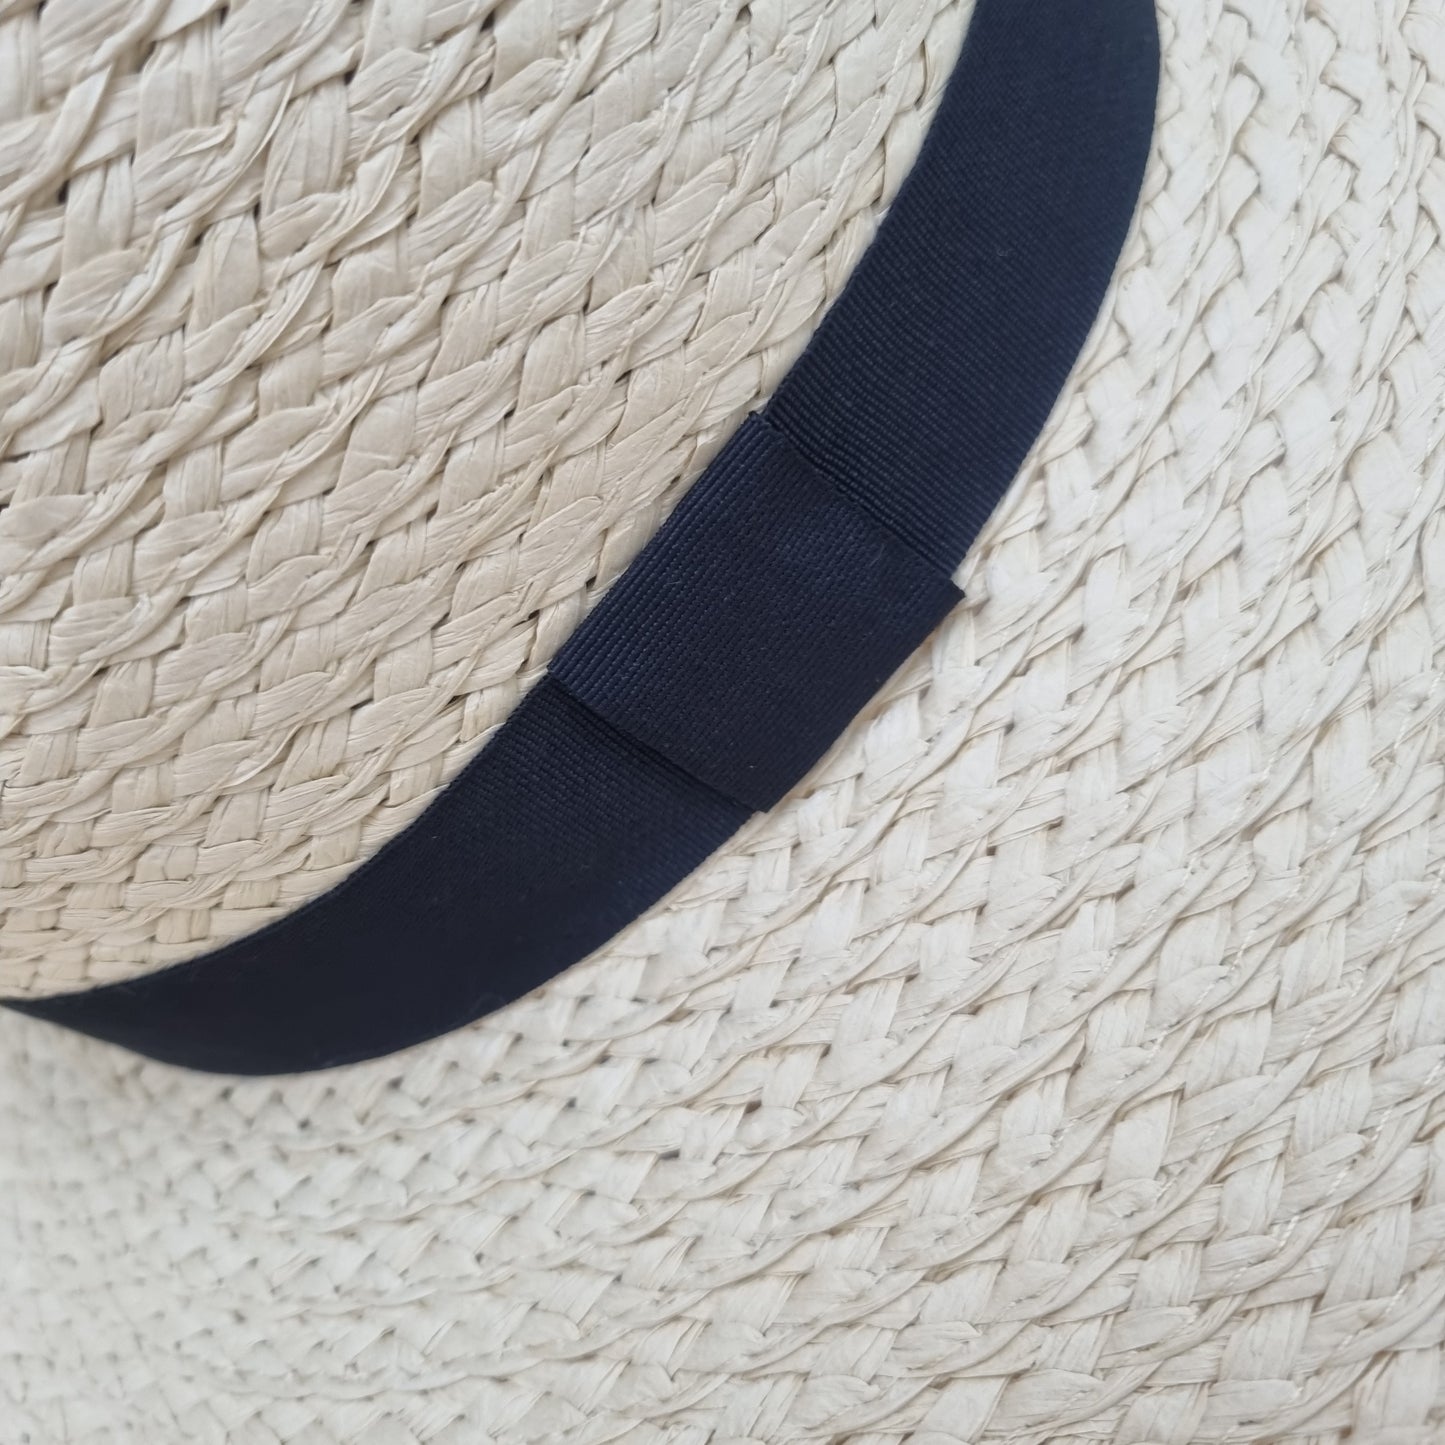 Fedora sun hat with band